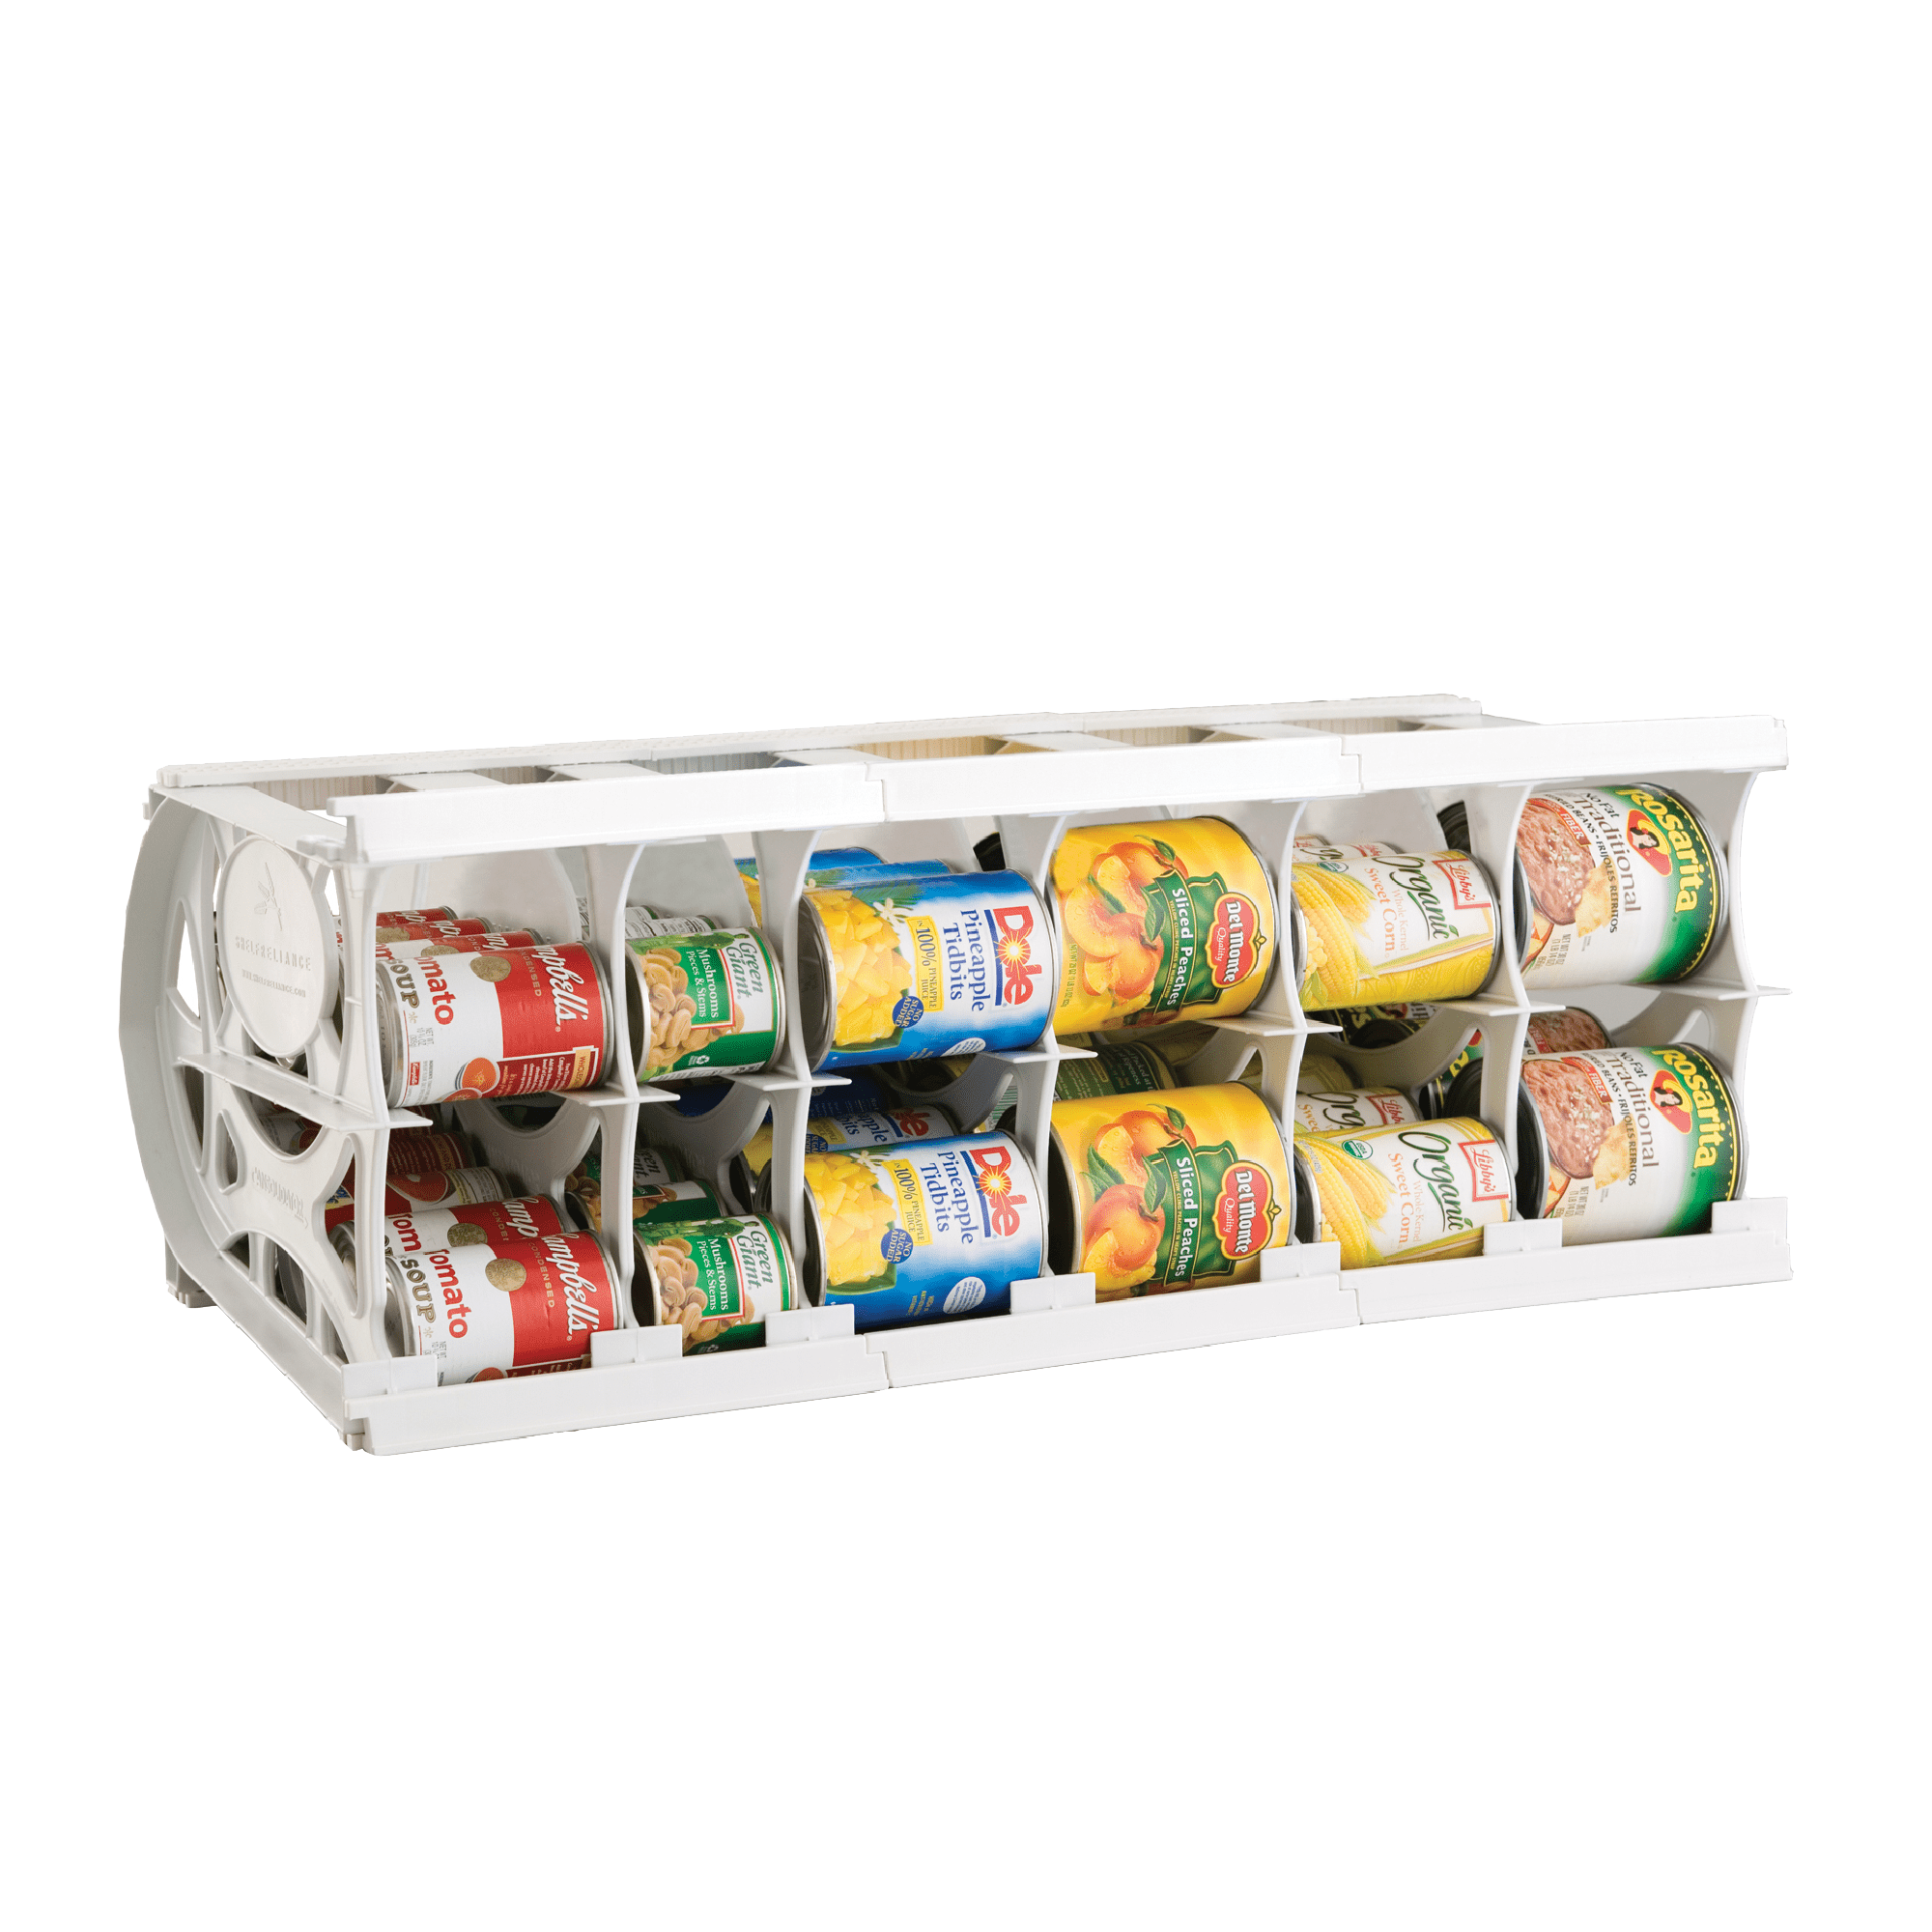 DIY Can Storage System - FIFO - Cheap and Easy to Build! 